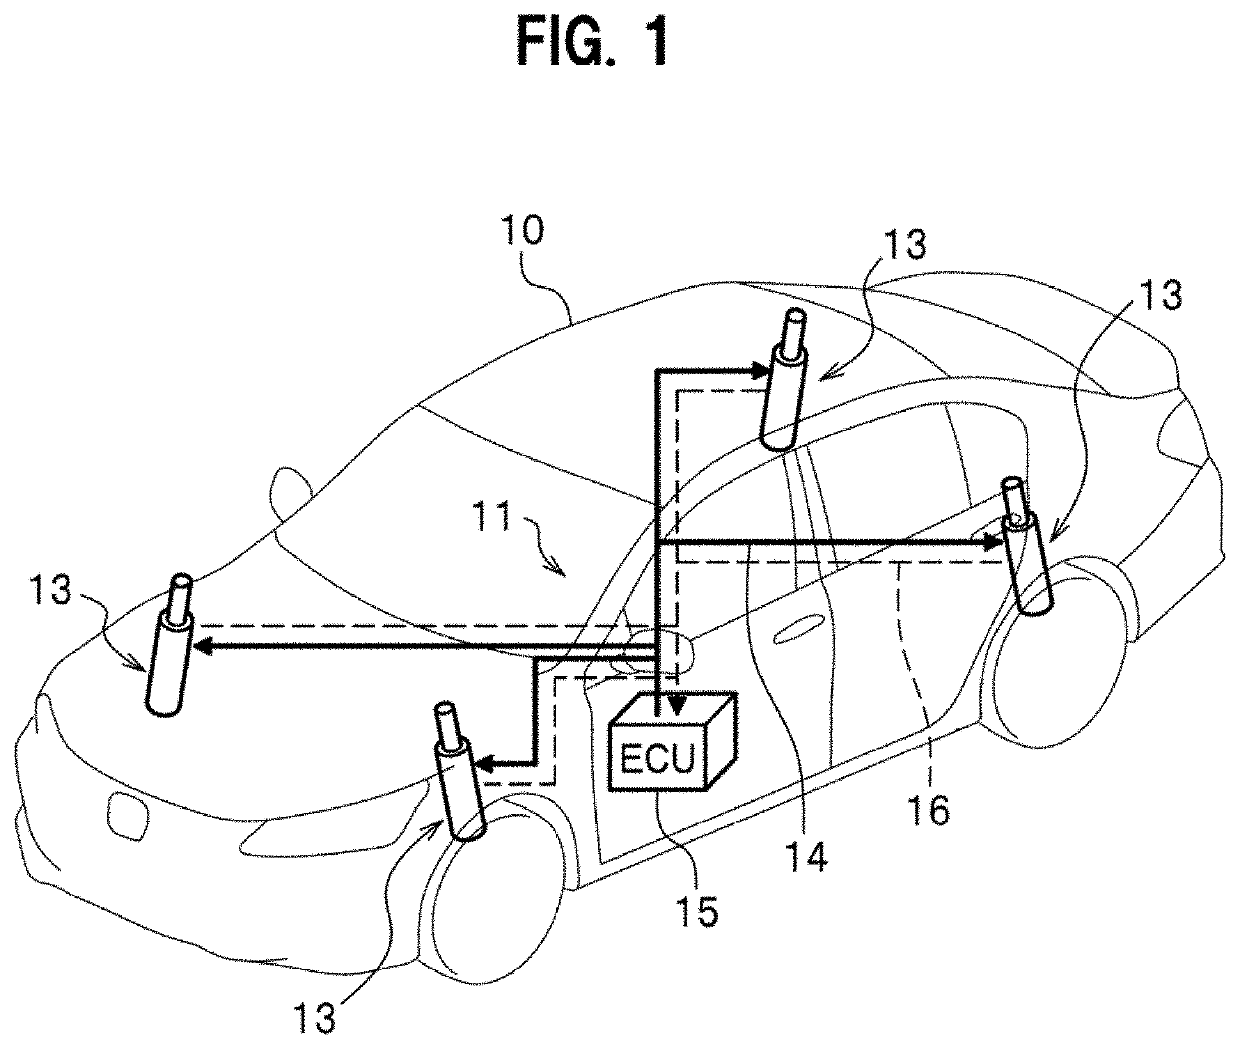 Electrically powered suspension system